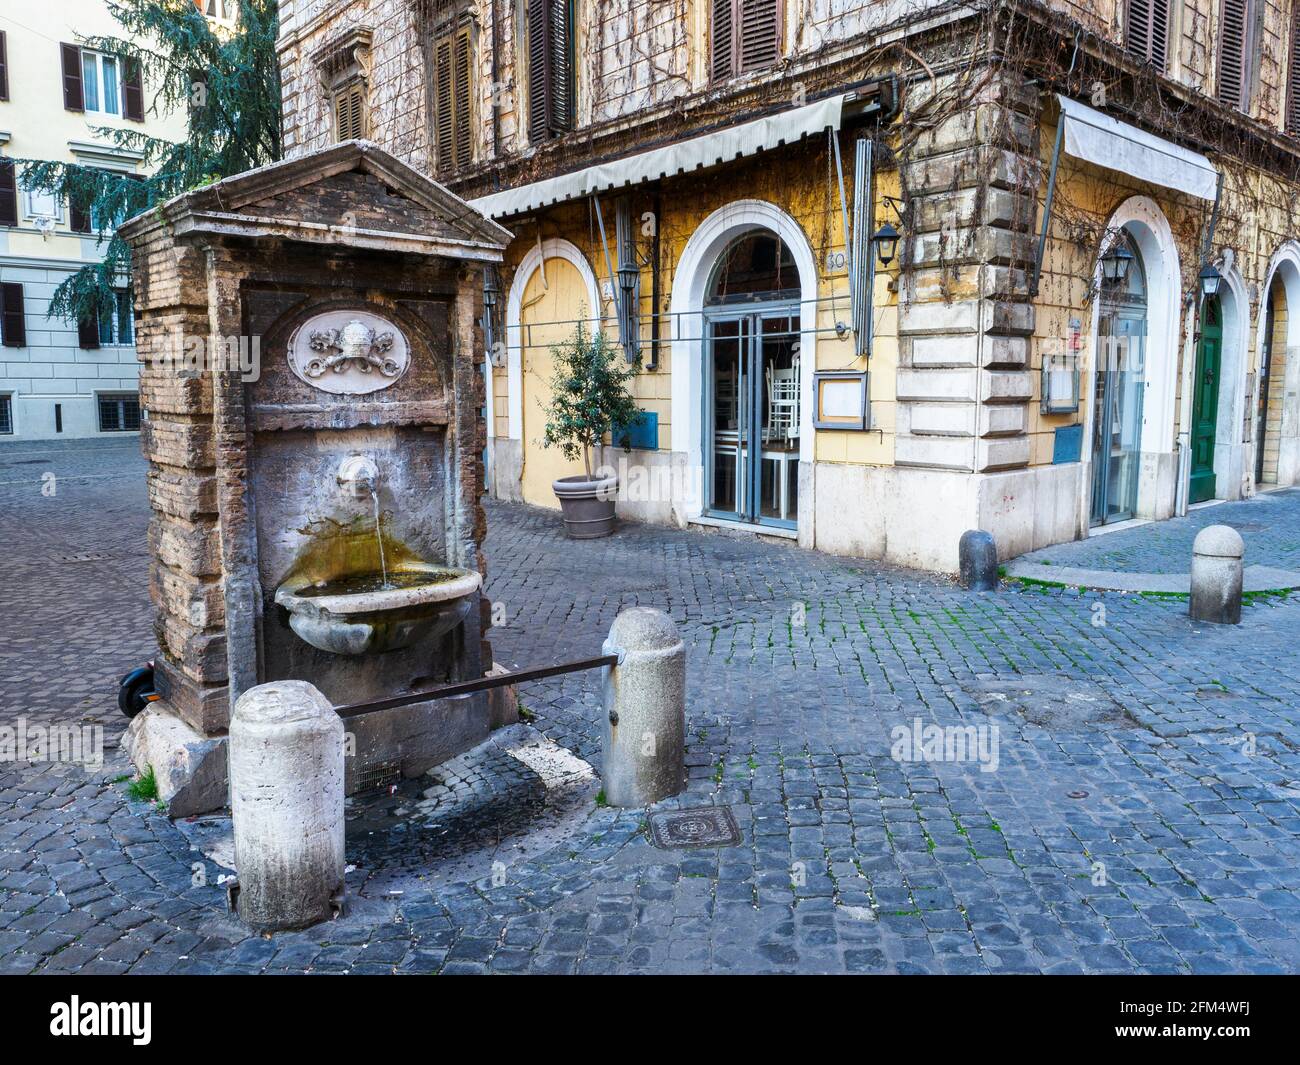 The fountain  in rione Borgo is protected by two small columns connected by an iron bar, consists of a simple rectangular travertine aedicule, gable at the top and leaning against a brick construction. The upper arch has a papal coat of arms - Rome, Italy Stock Photo